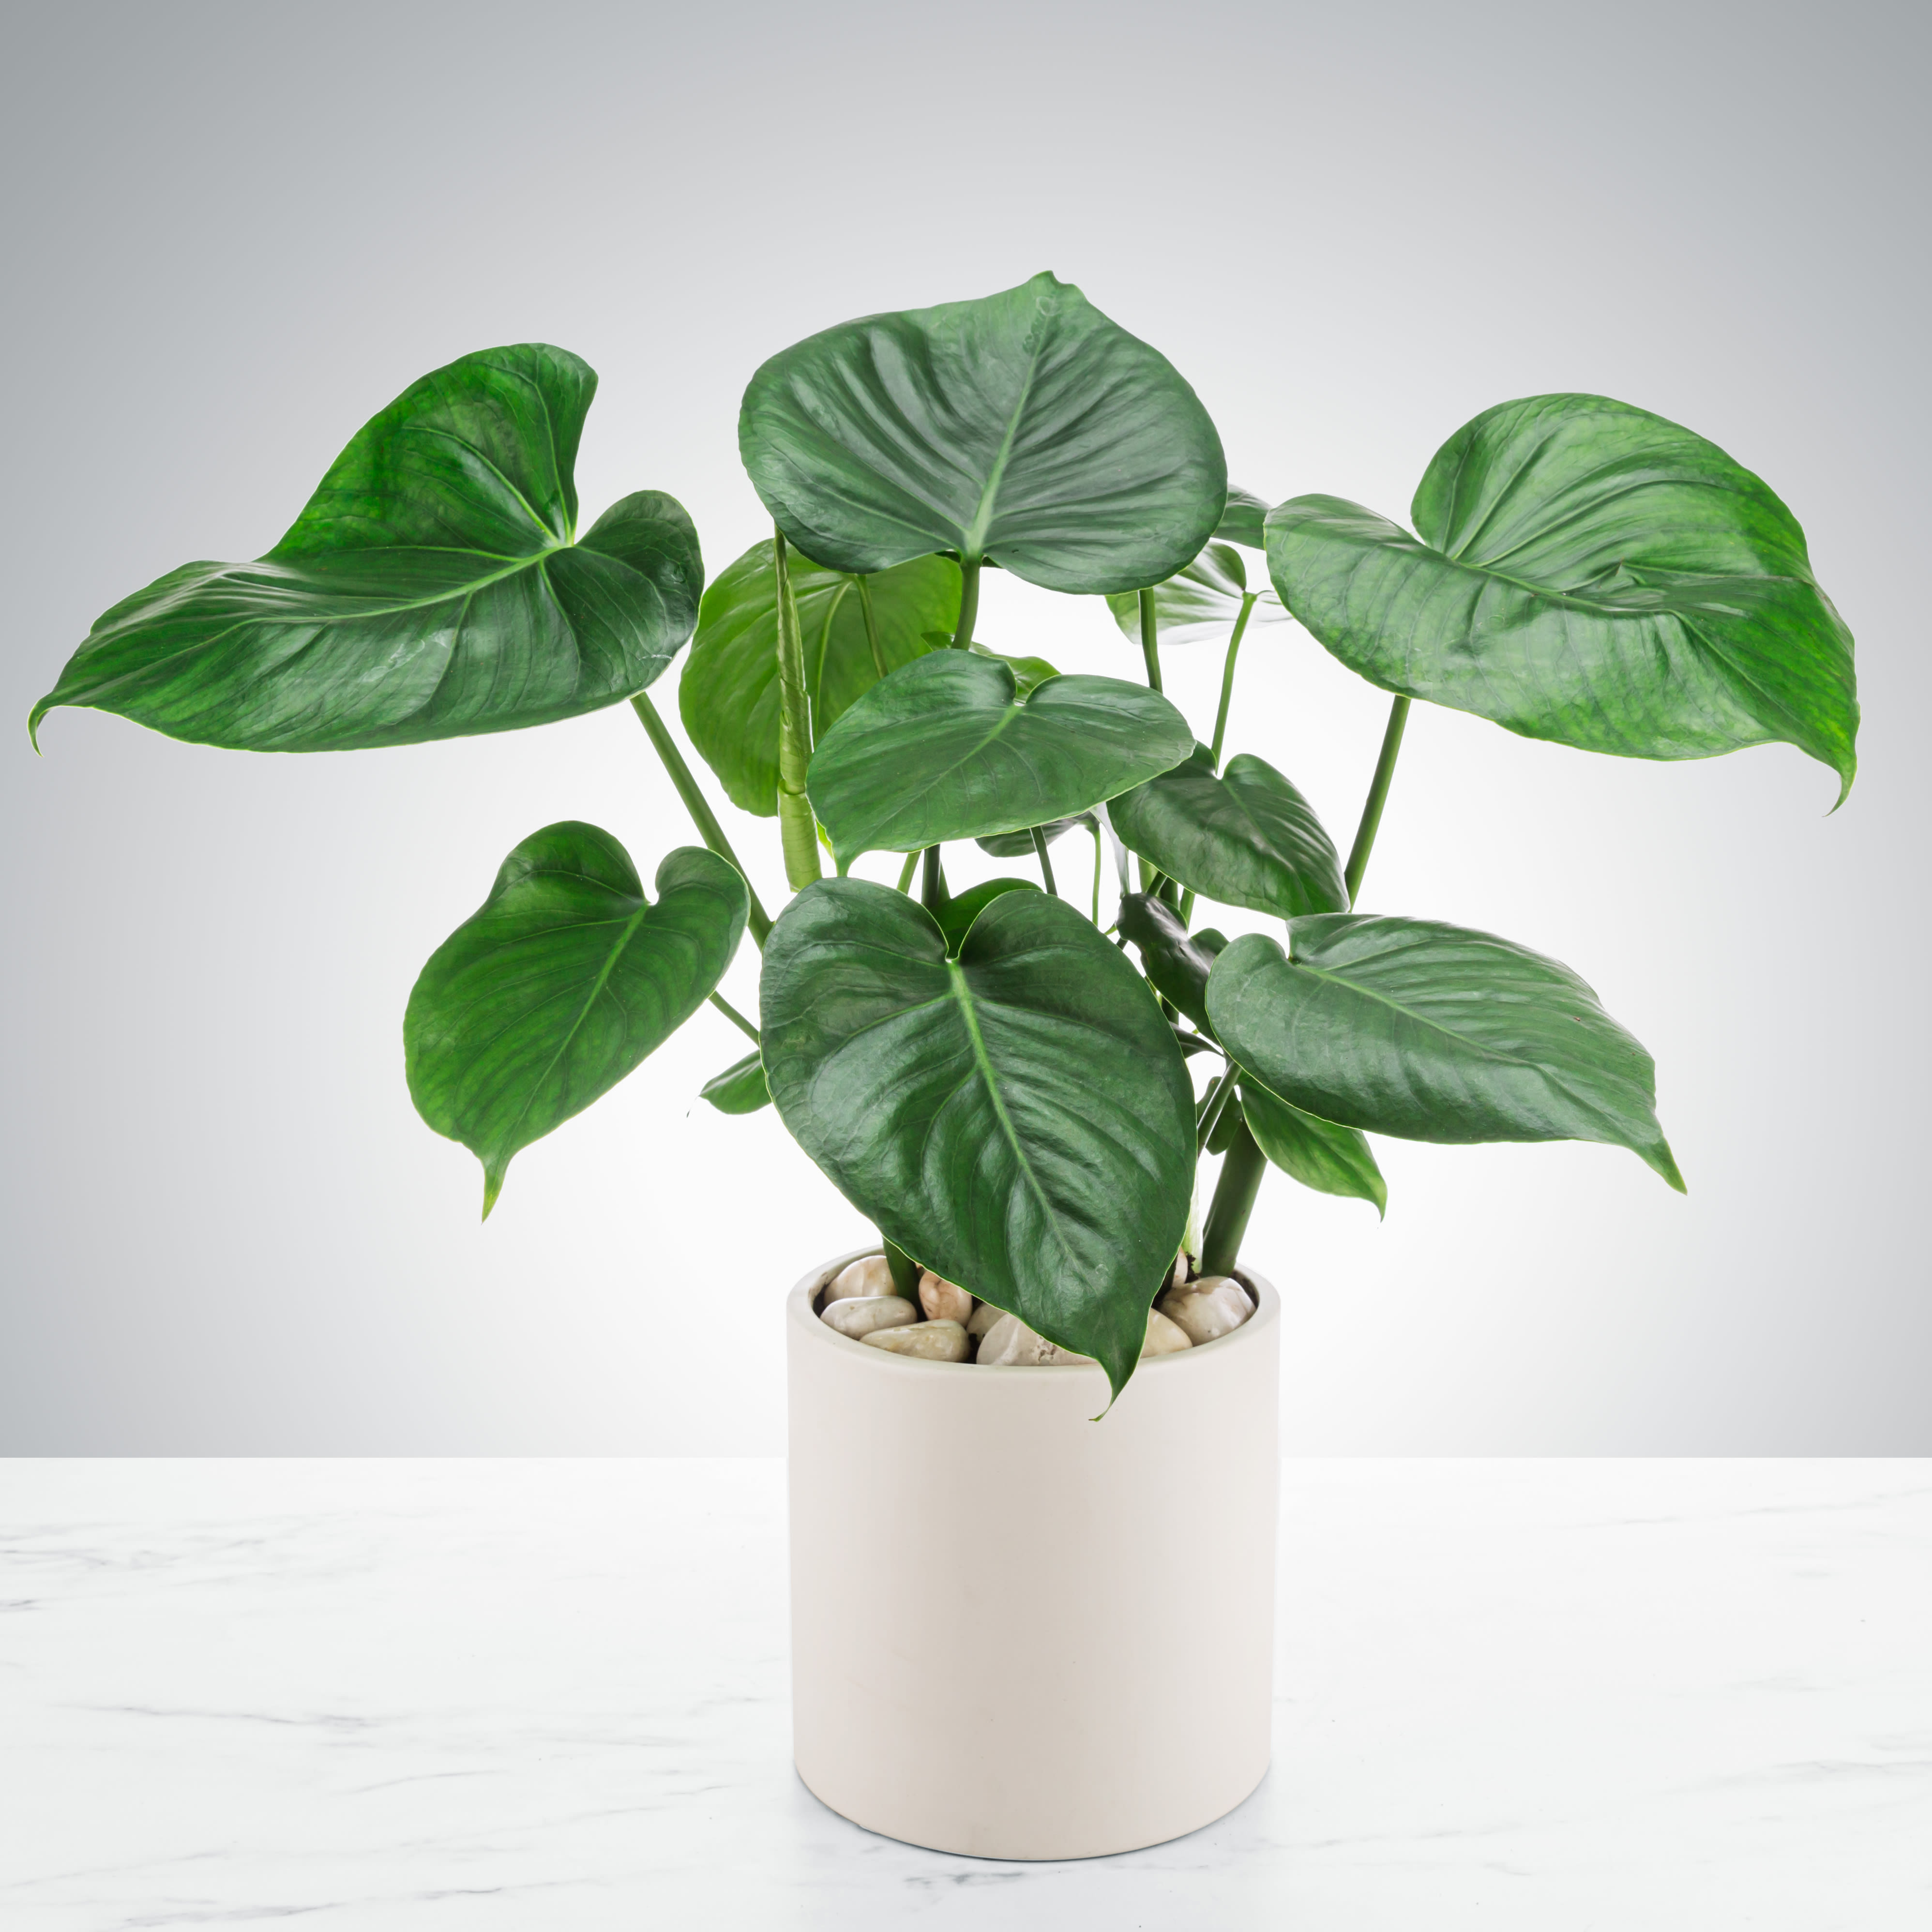 Split Leaf Philodendron - The split-leaf philodendron, also referred to as a monstera, is a classic house plant that leaves split as it grows under the sun. Enjoyed by everyone, this houseplant is a great addition to any collection.